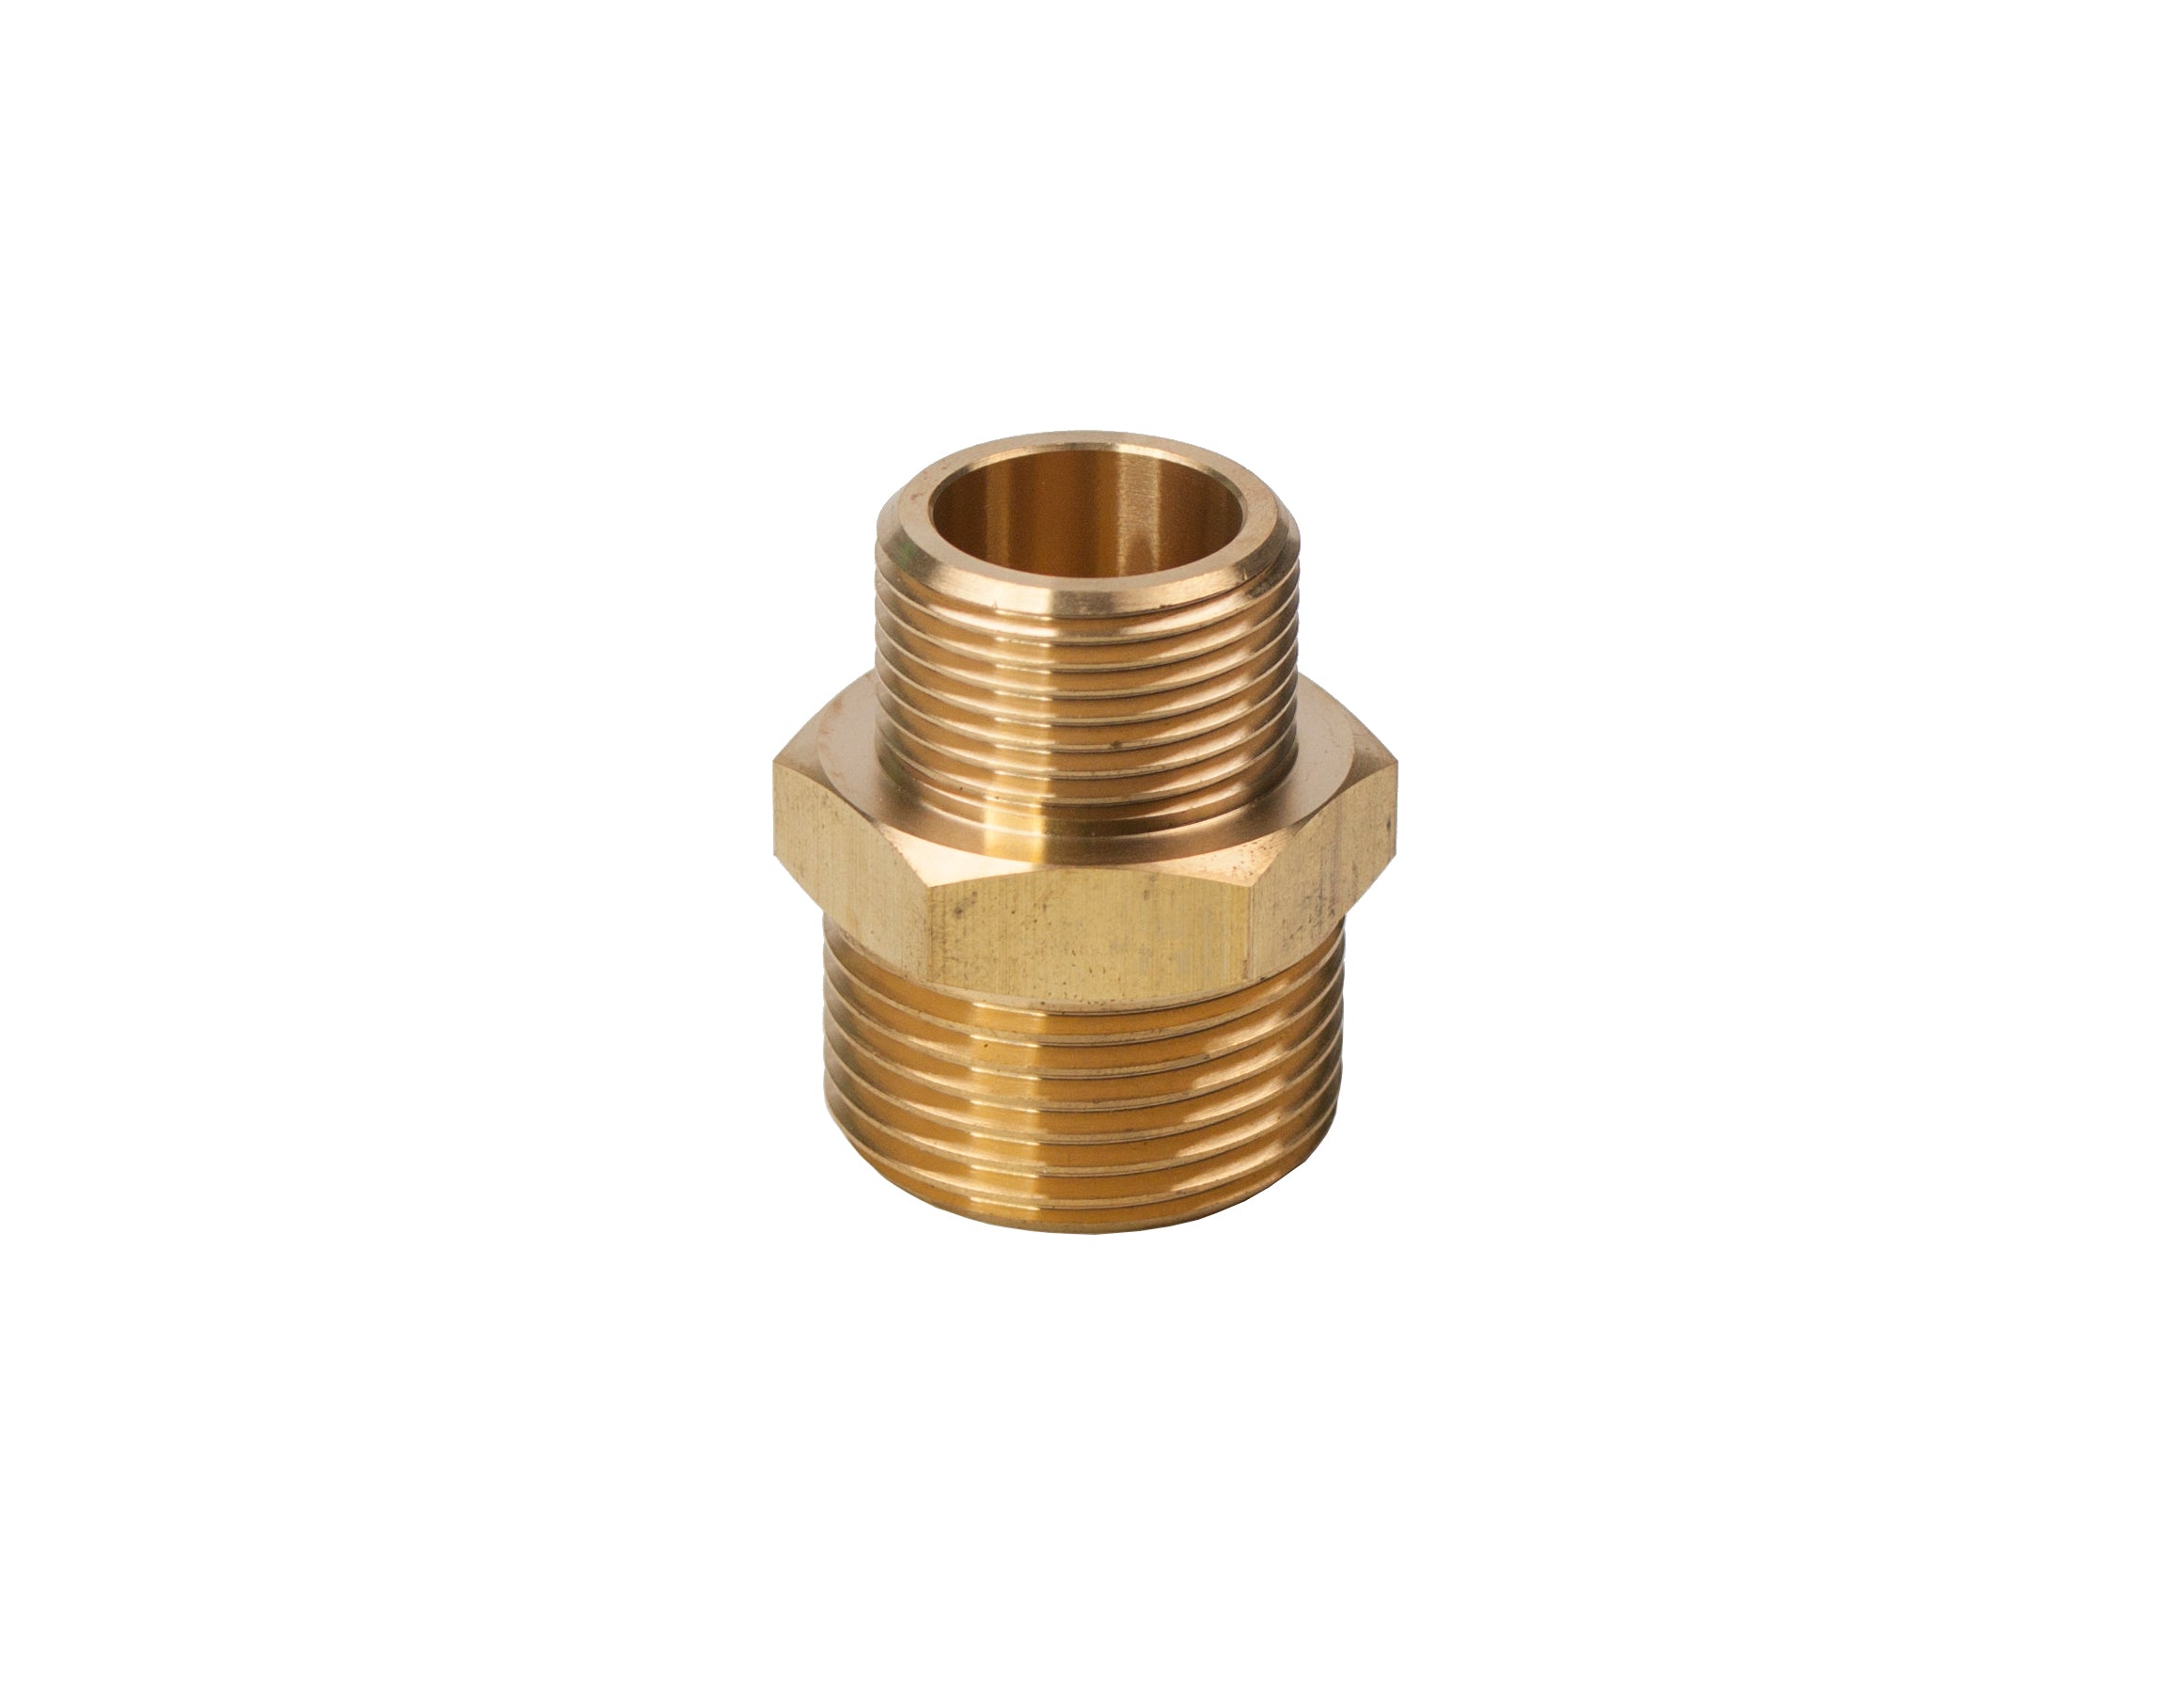 LTWFITTING Brass BSP Pipe Hex Reducing Nipple Fitting 1-Inch x 3/4-Inch Male BSPP (Pack of 100)